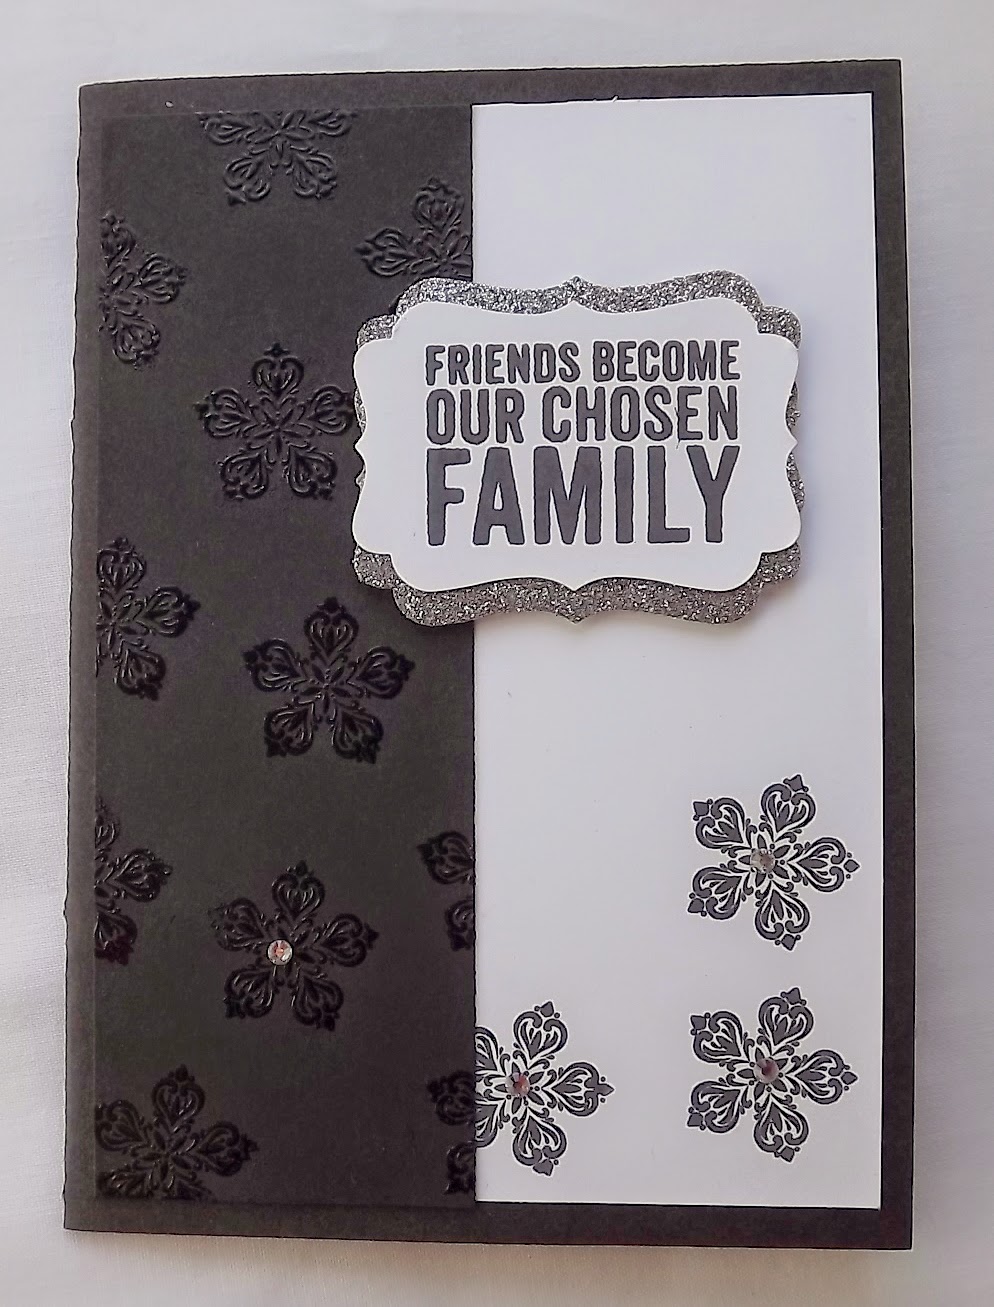 Stampin Up! Petite Petals, heat embossed, black and white card